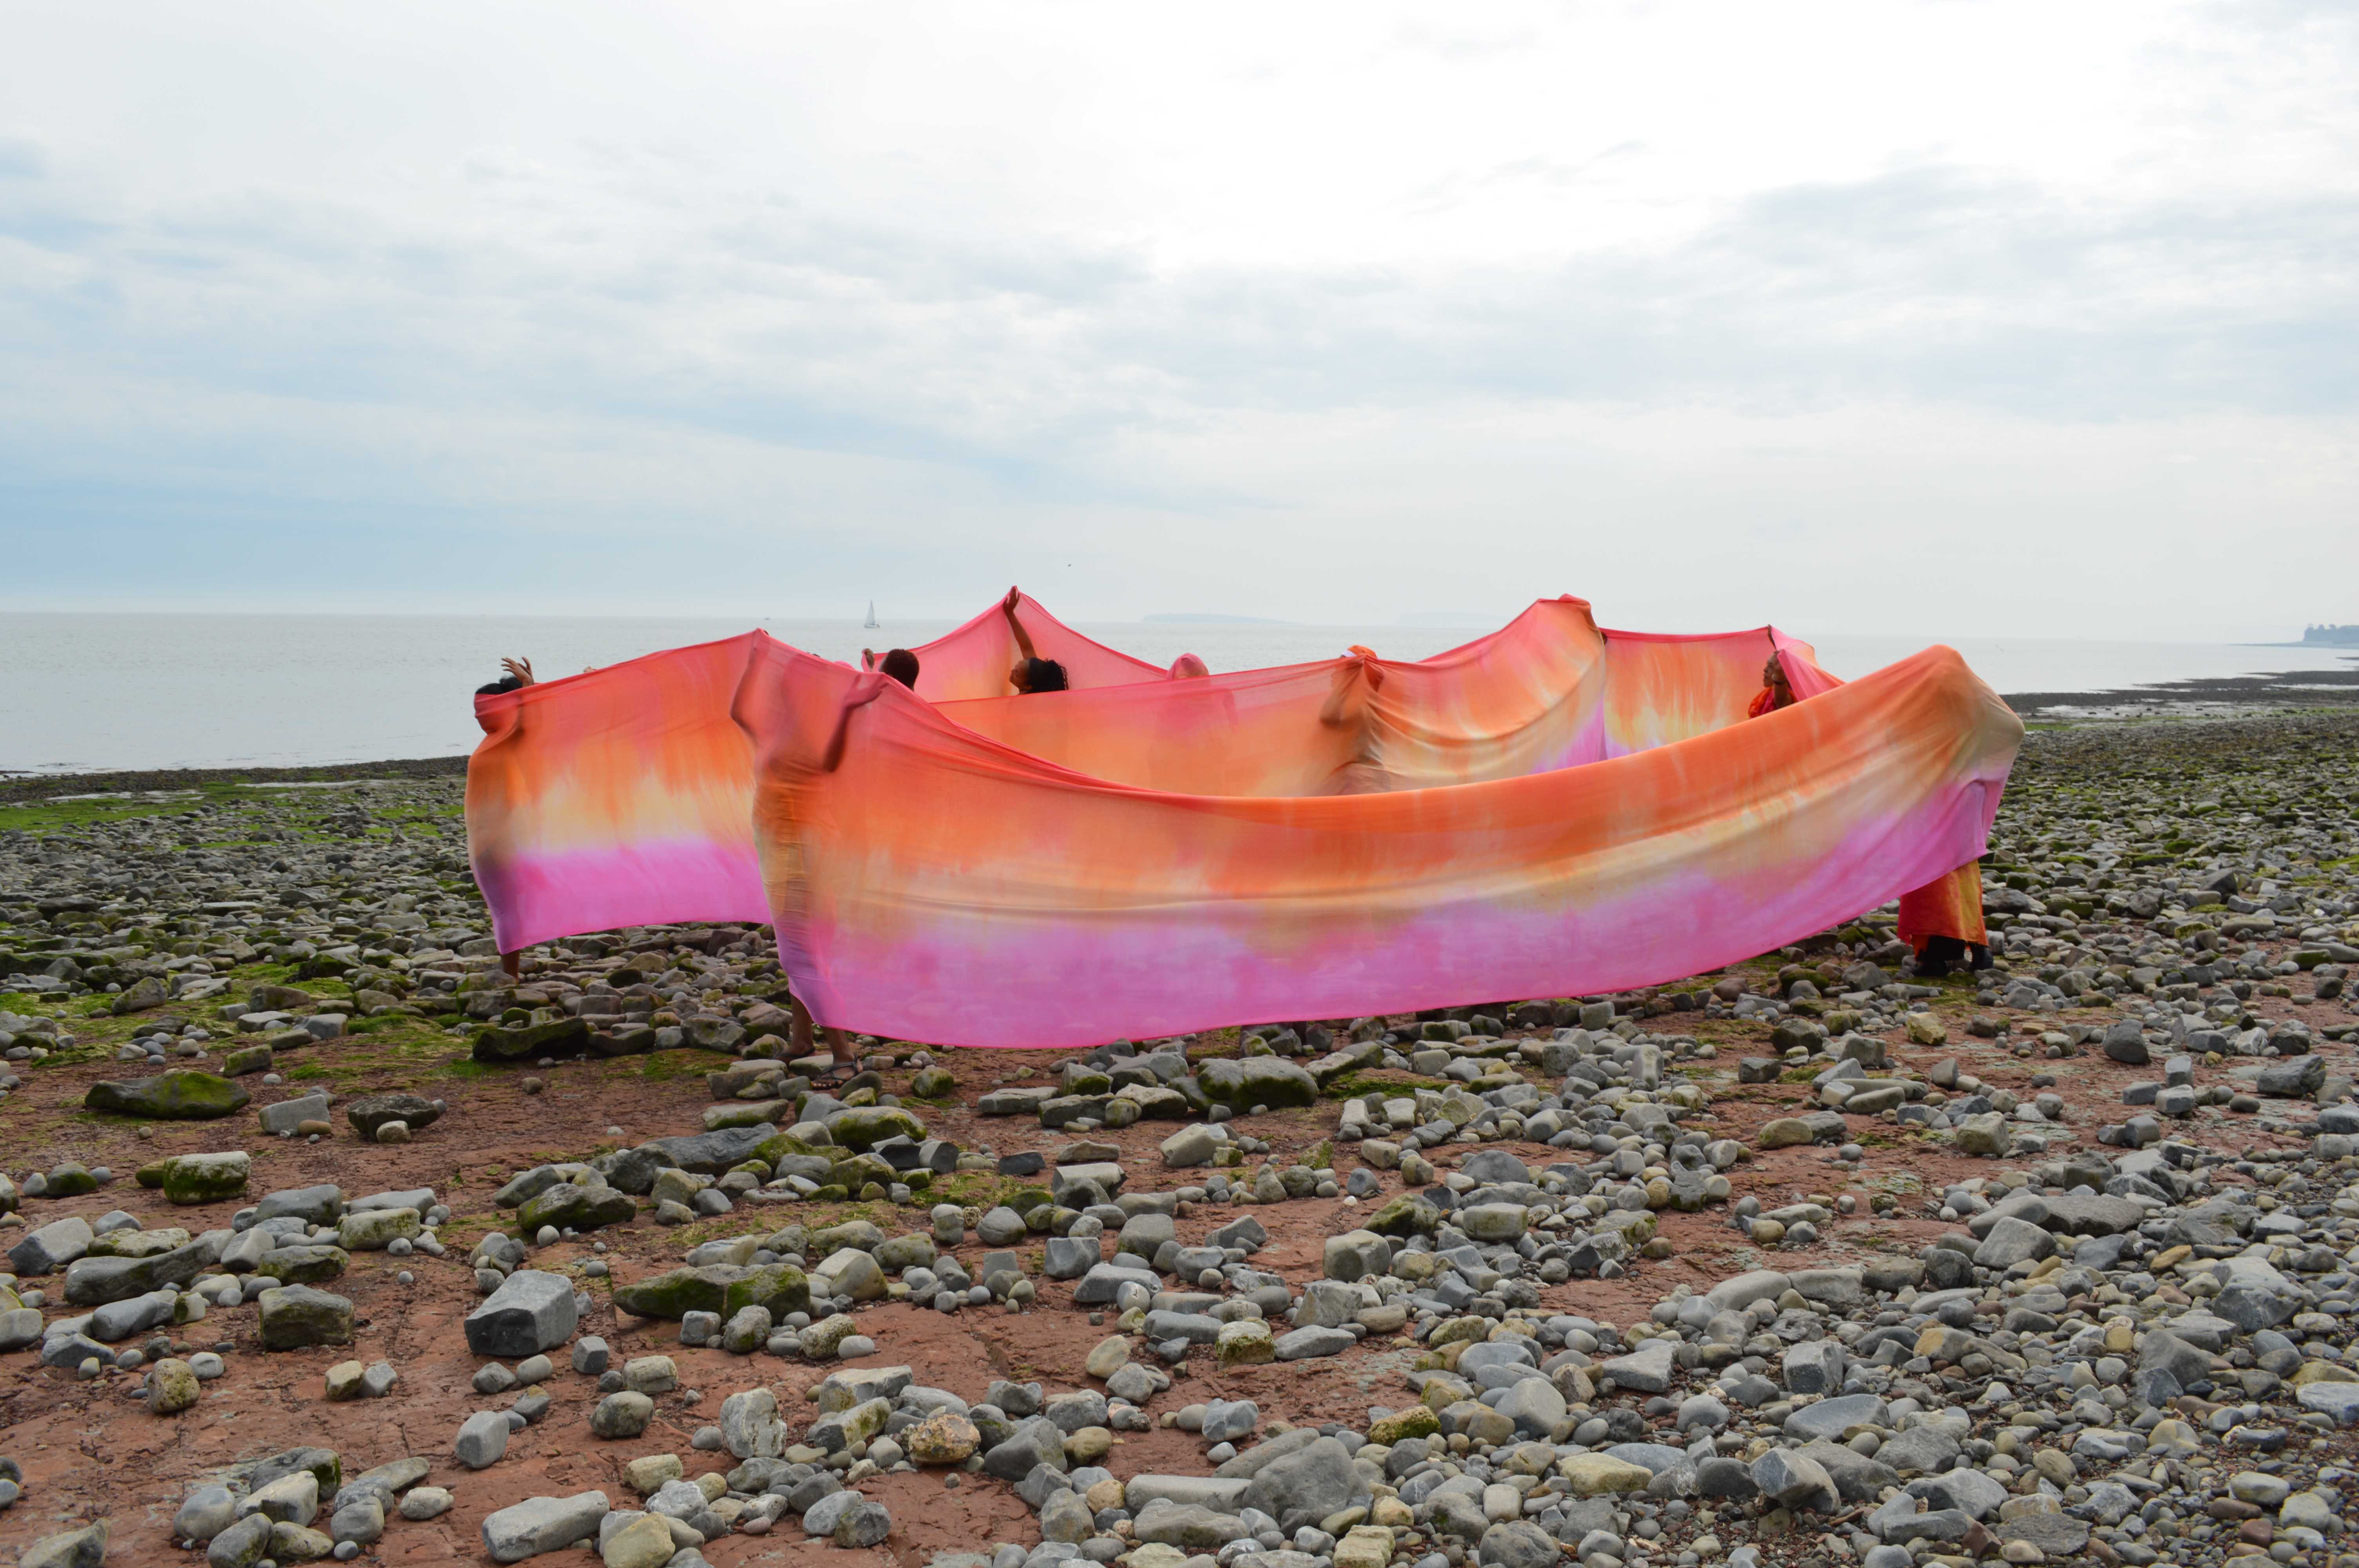 Women holding a large piece of dyed orange and pink fabric, wrapped around their bodies. Standing on a pebbled beach, grey skies in the background.